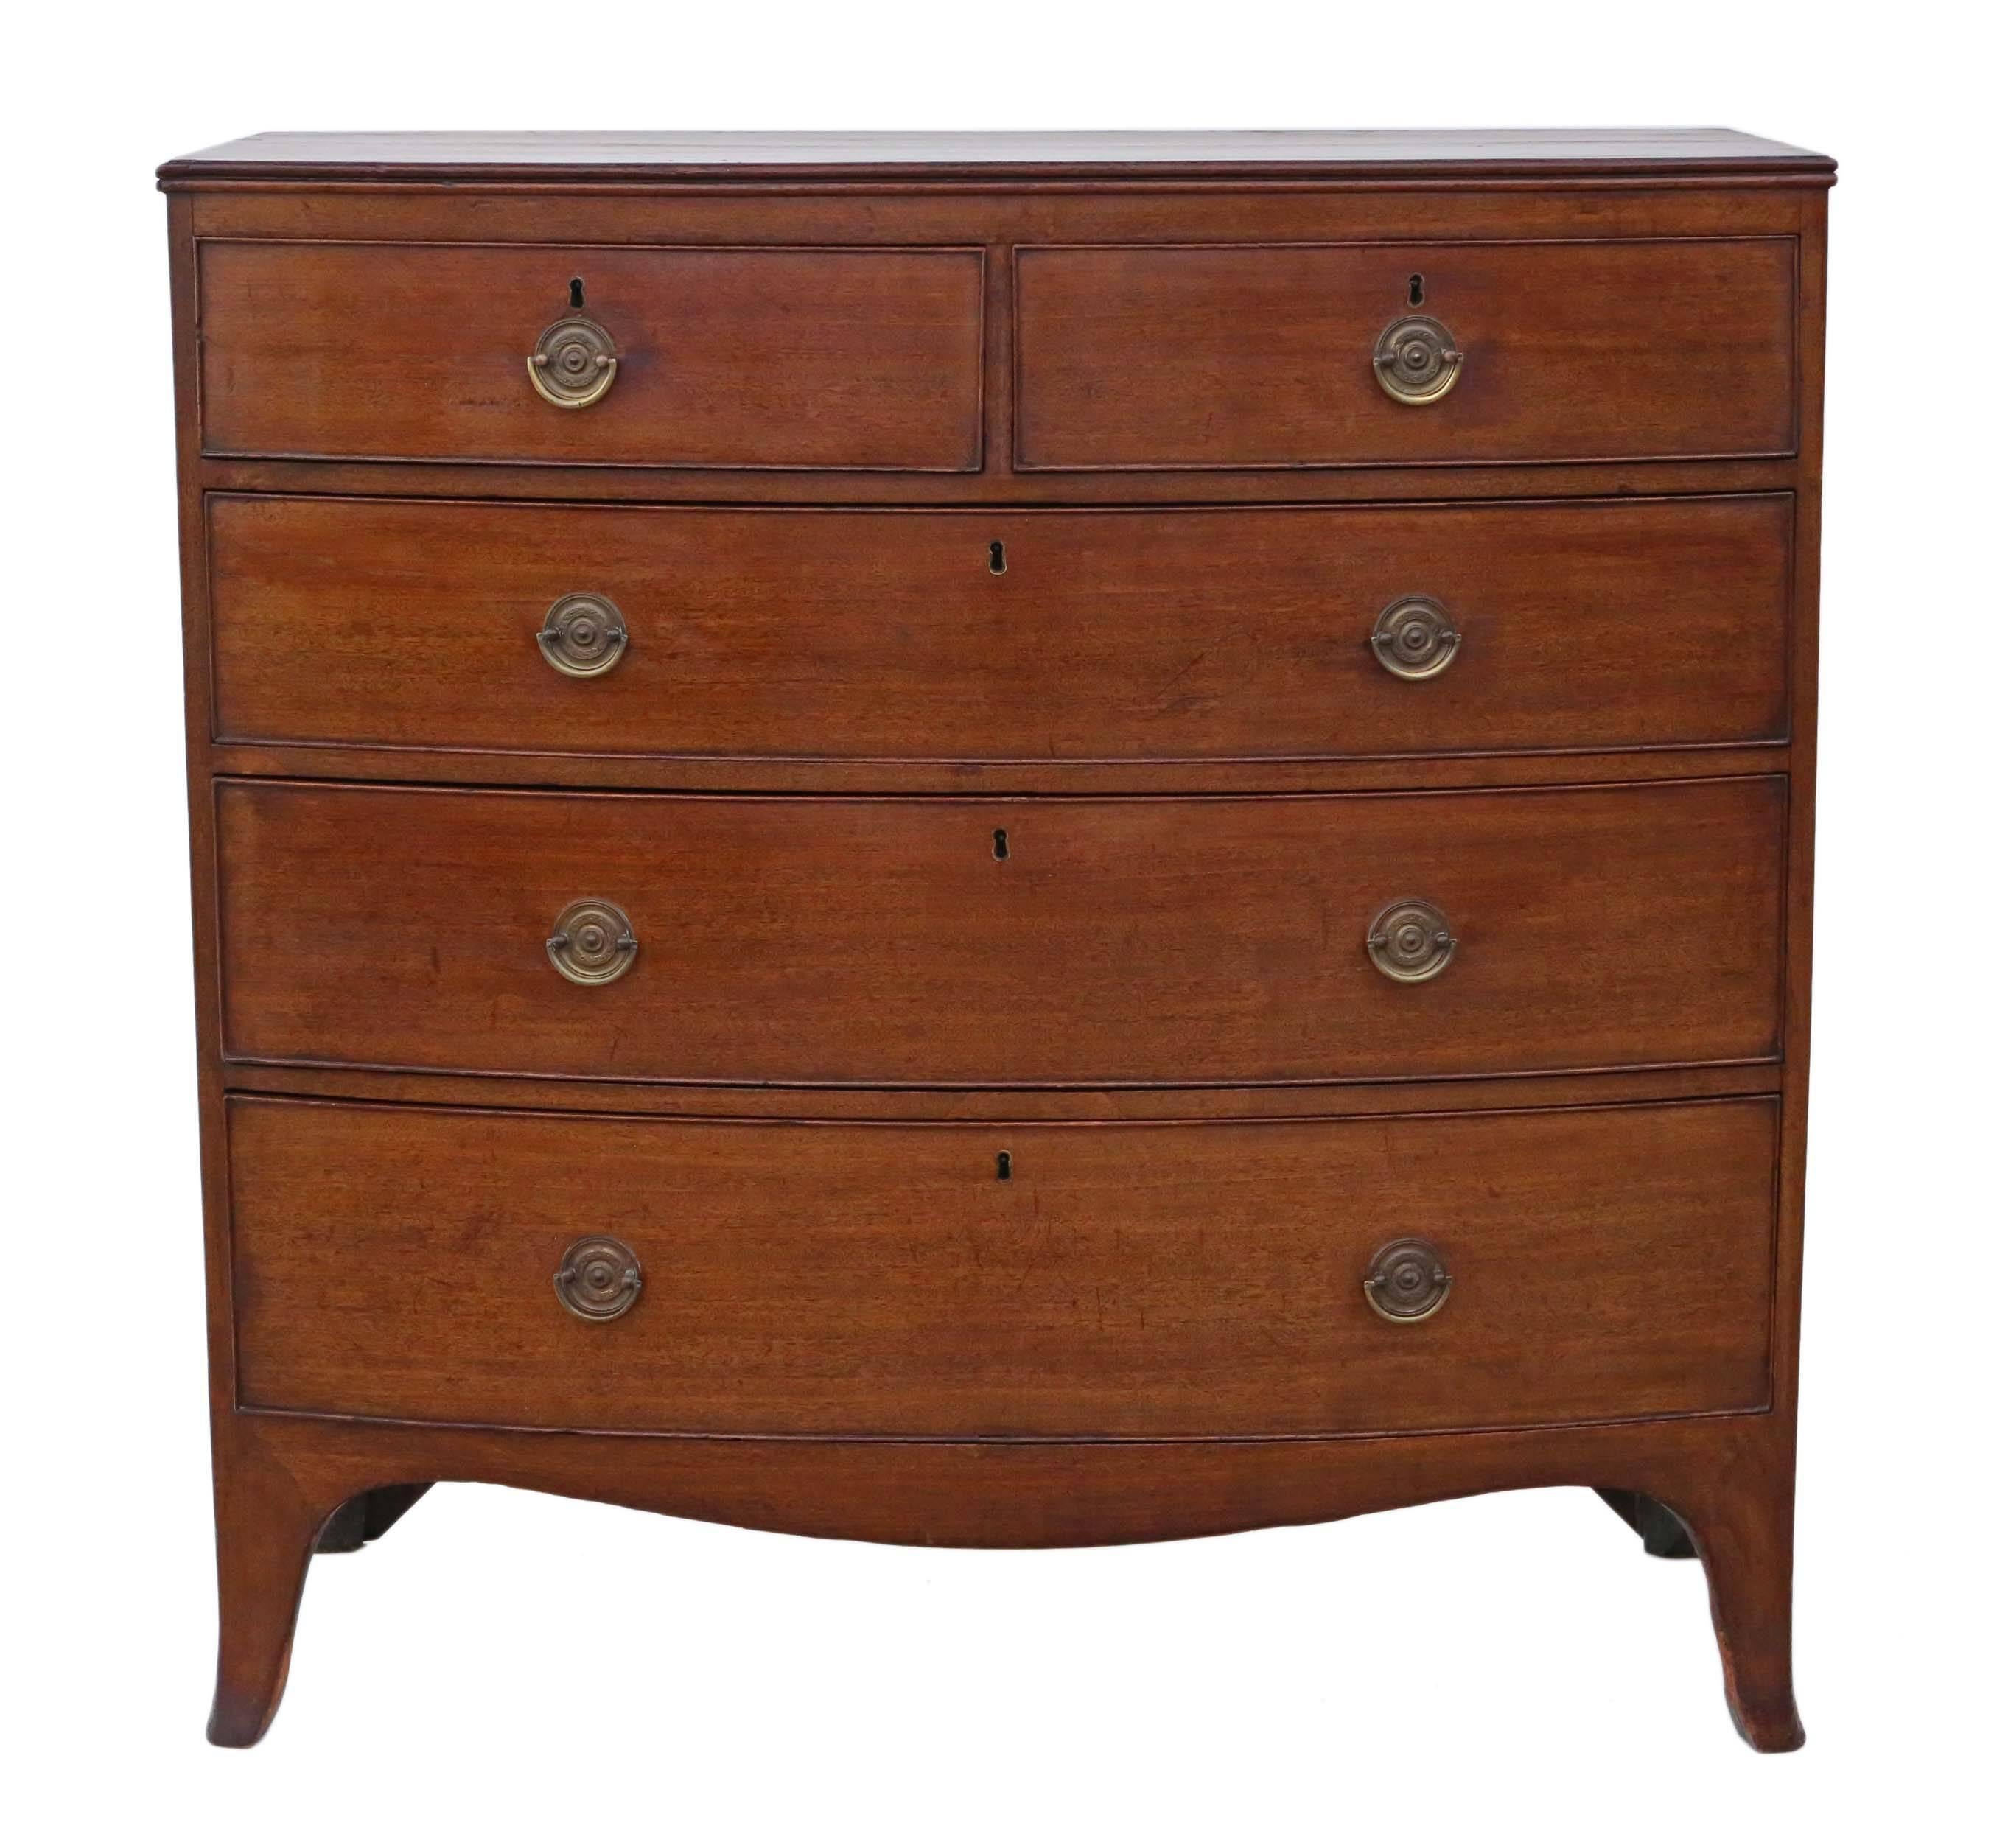 Early 19th Century Antique Georgian Mahogany Bow Front Chest of Drawers, circa 1800